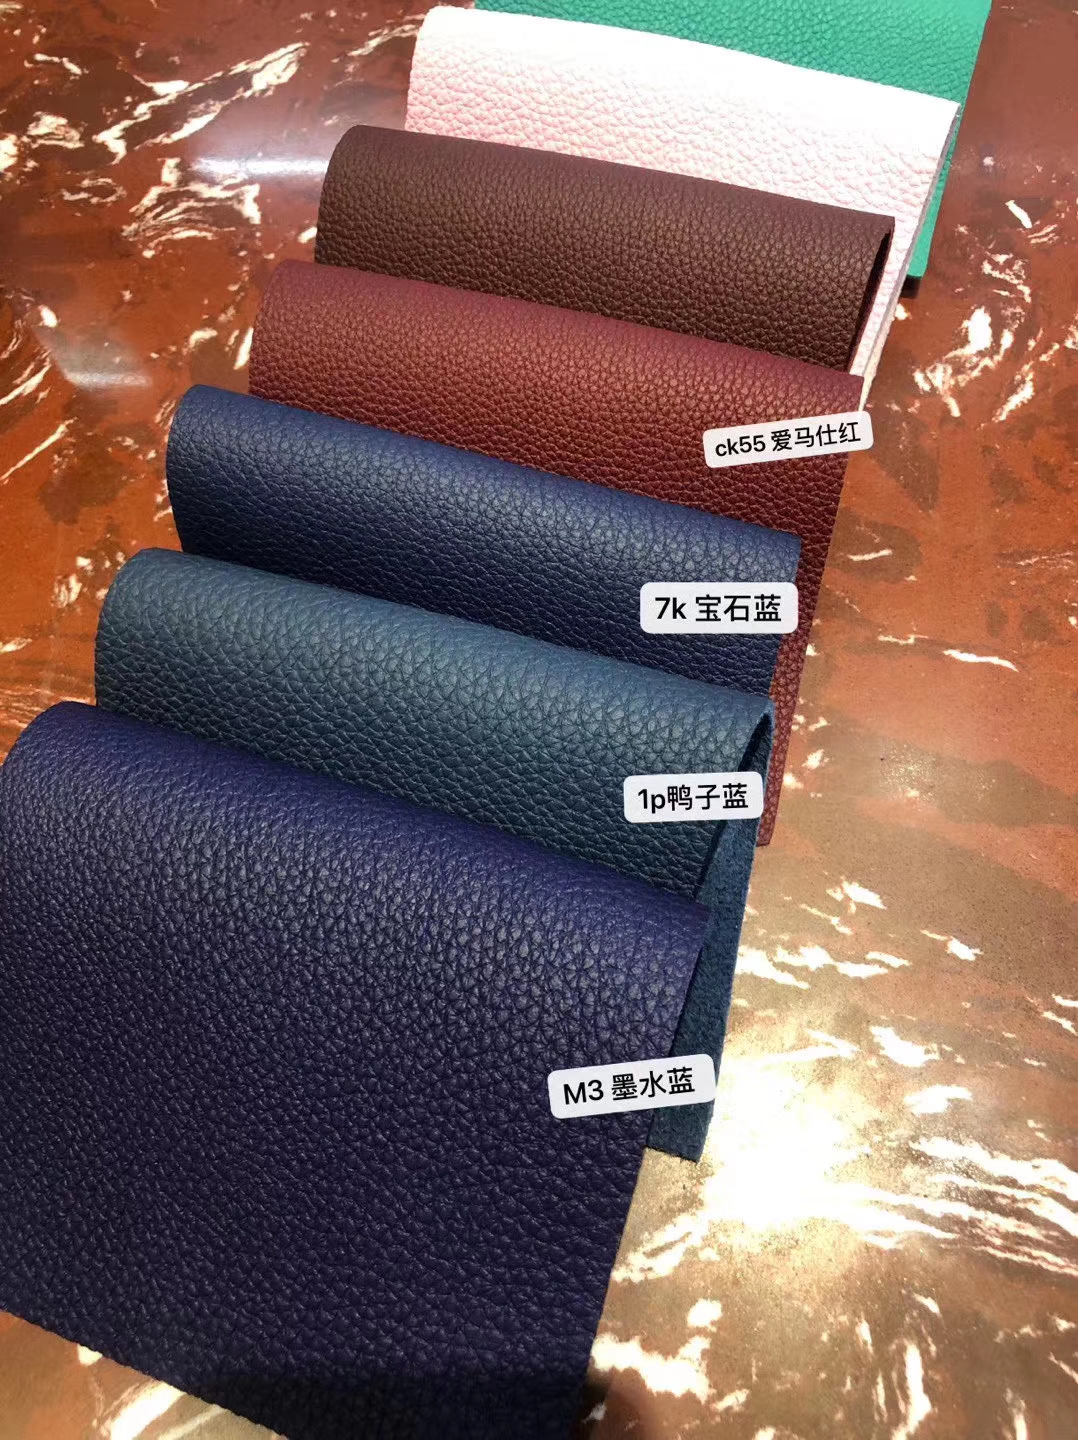 New Arrival Hermes New Multi-color Togo Calf Leather Hermes Bags Customize